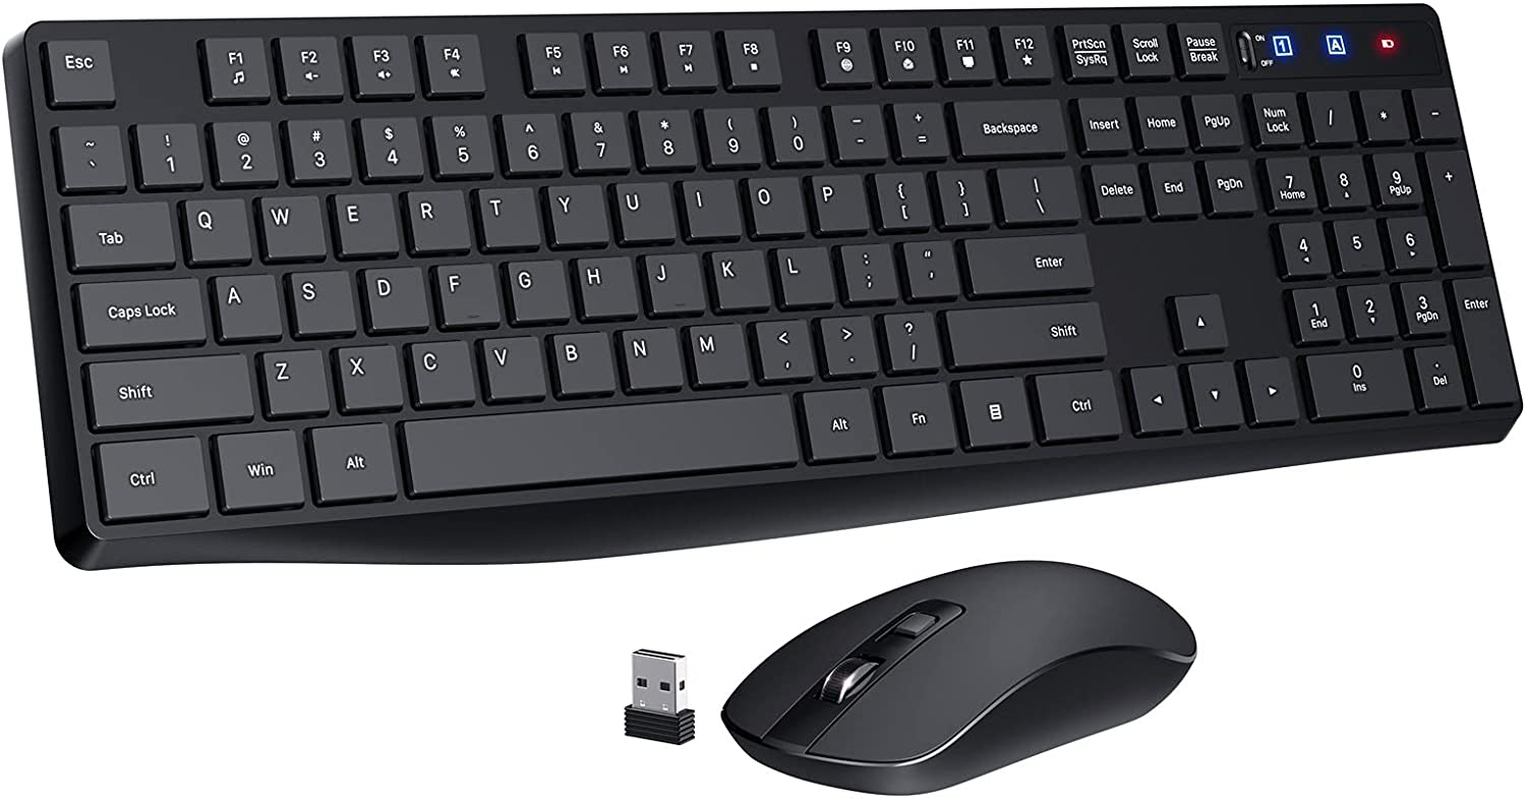 PC230 Wireless Keyboard Mouse Combo, Energy Saving, Slim Quick 2.4Ghz Cordless Full Size Computer Keyboard Silent & 3 Adjustable DPI USB Mouse Independent On/Off Switch for PC Laptop, Black